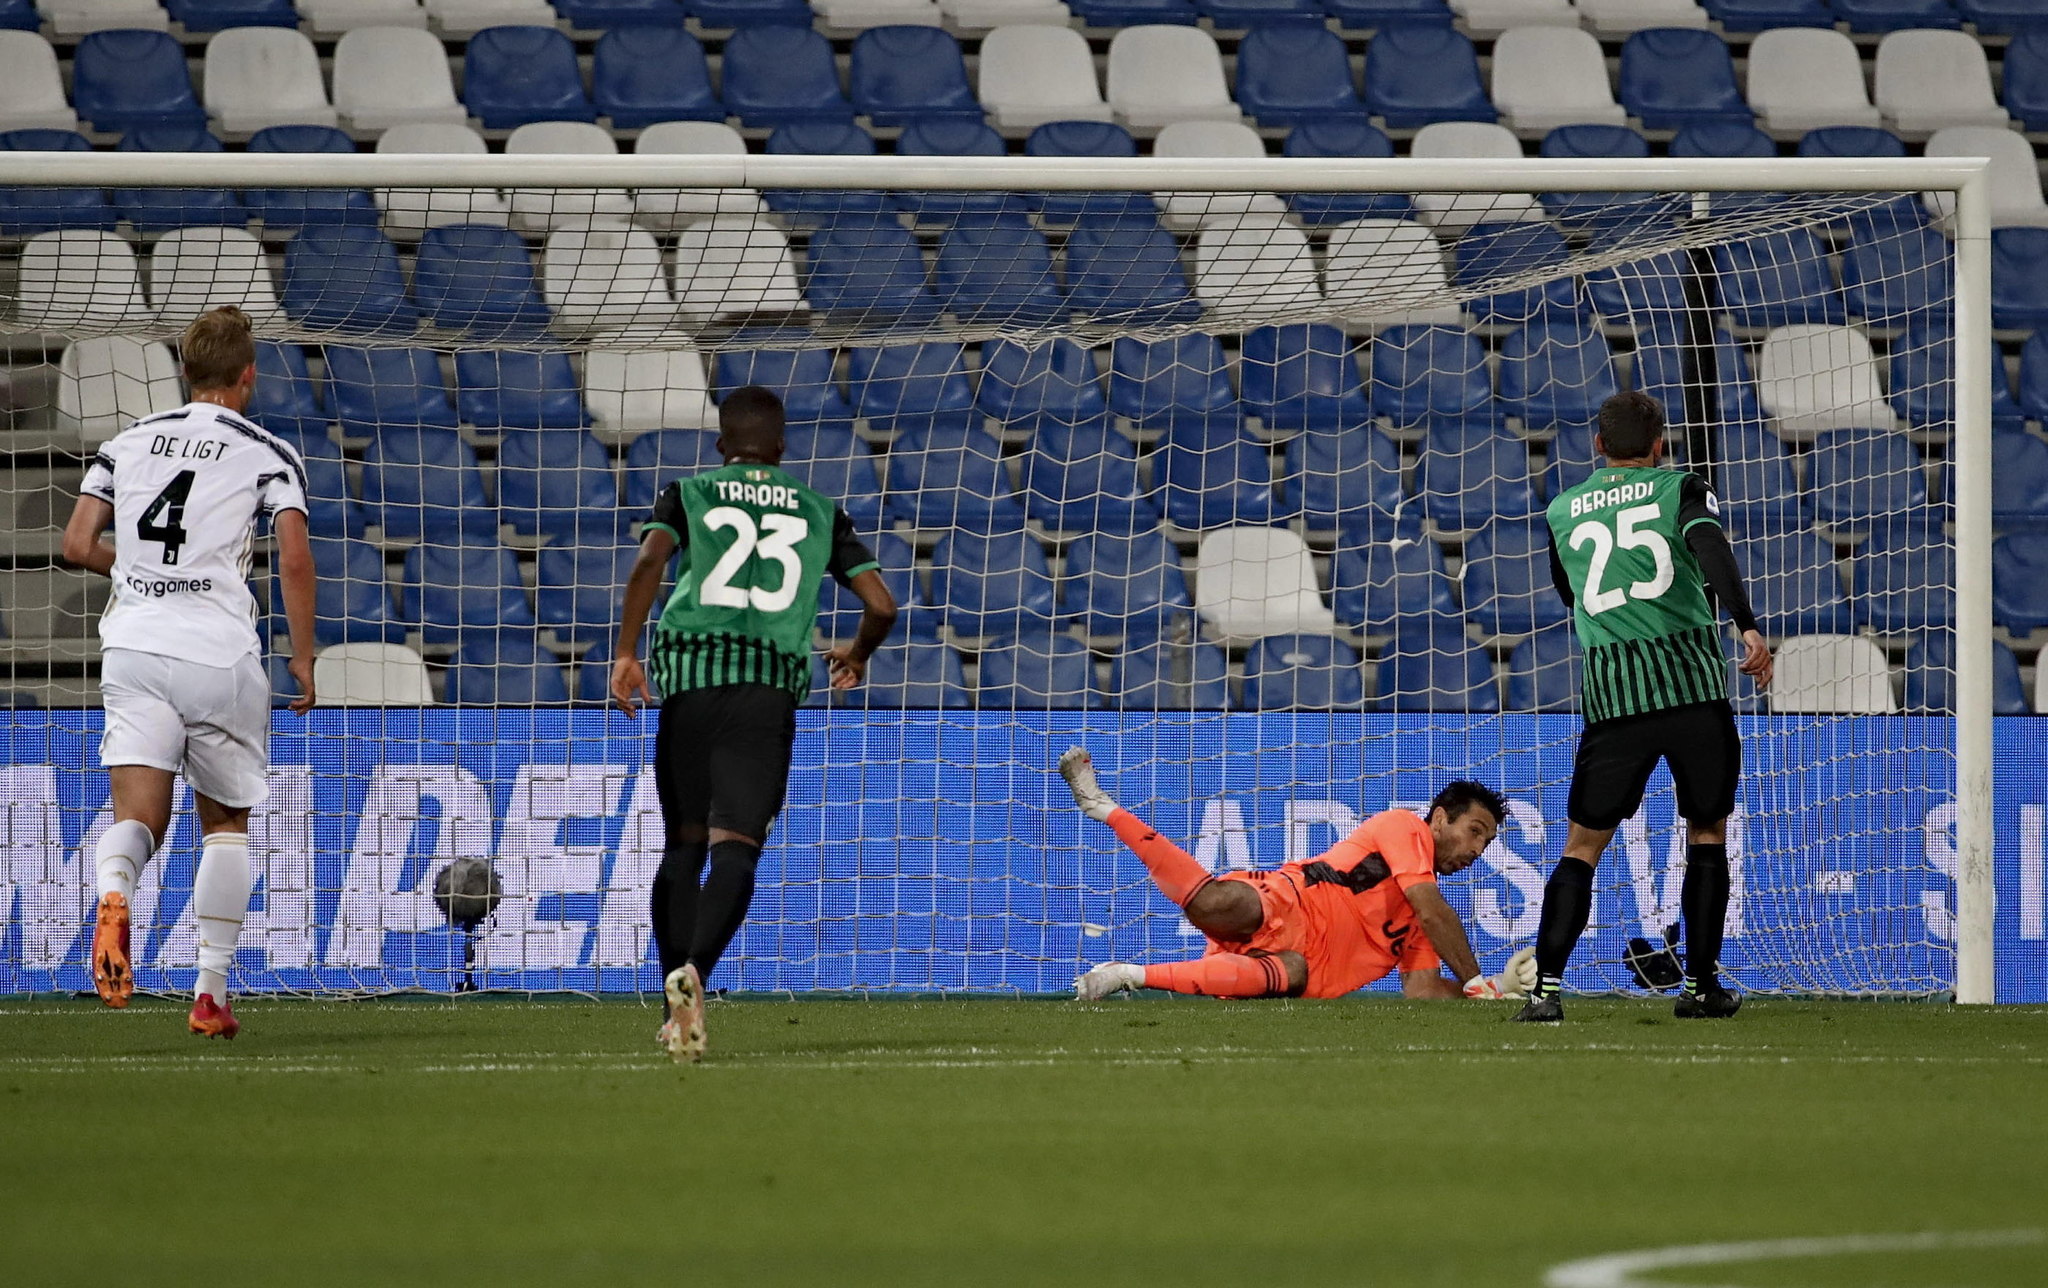 Gianluigi Buffon saves a penalty against Sassuolo in potentially his final Serie A match with Juventus.